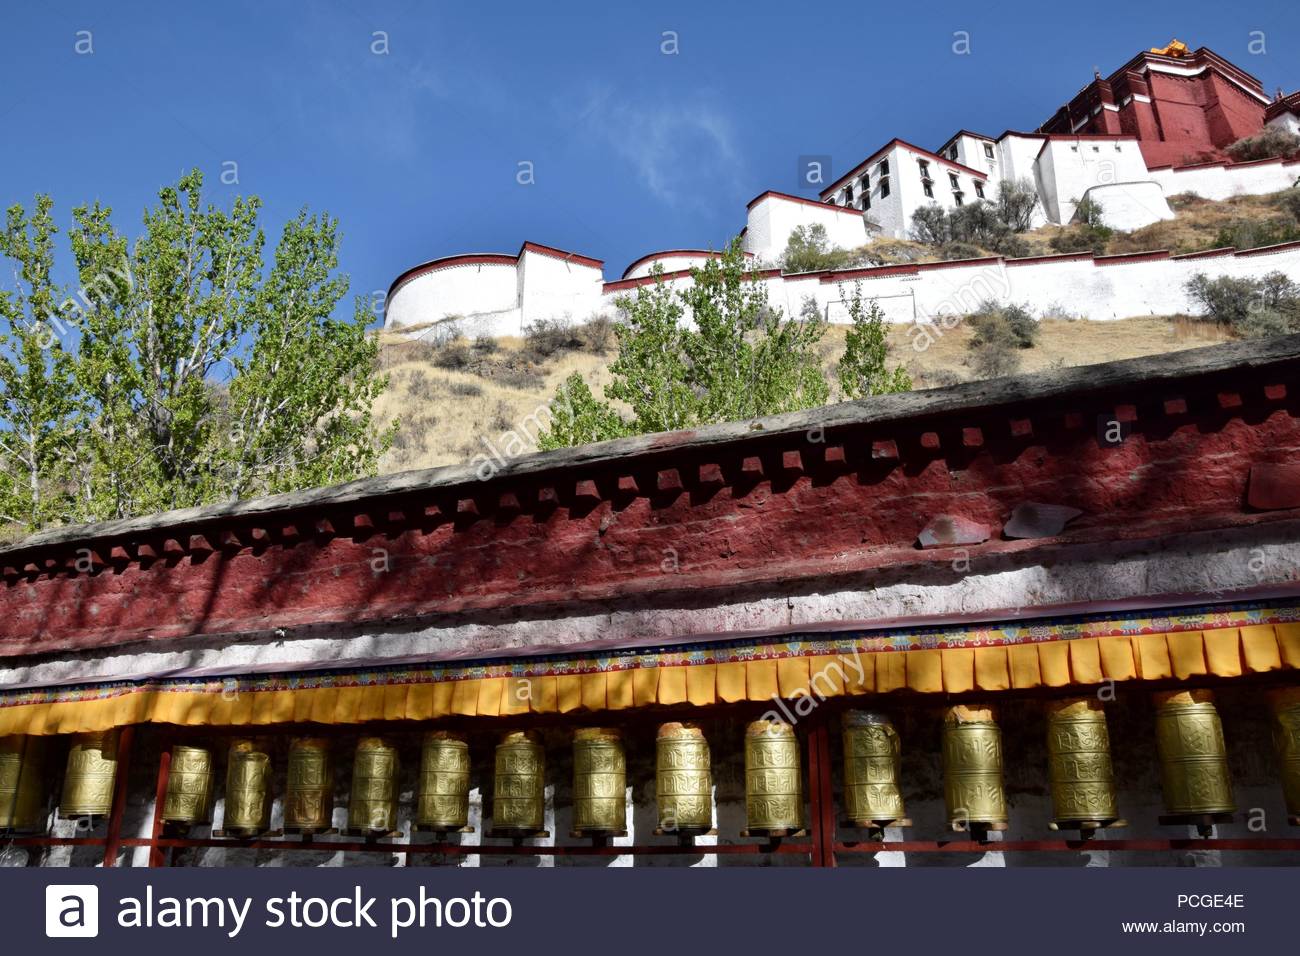 Tibetan Prayer Wheels With Potala Palace In The Background Tibet